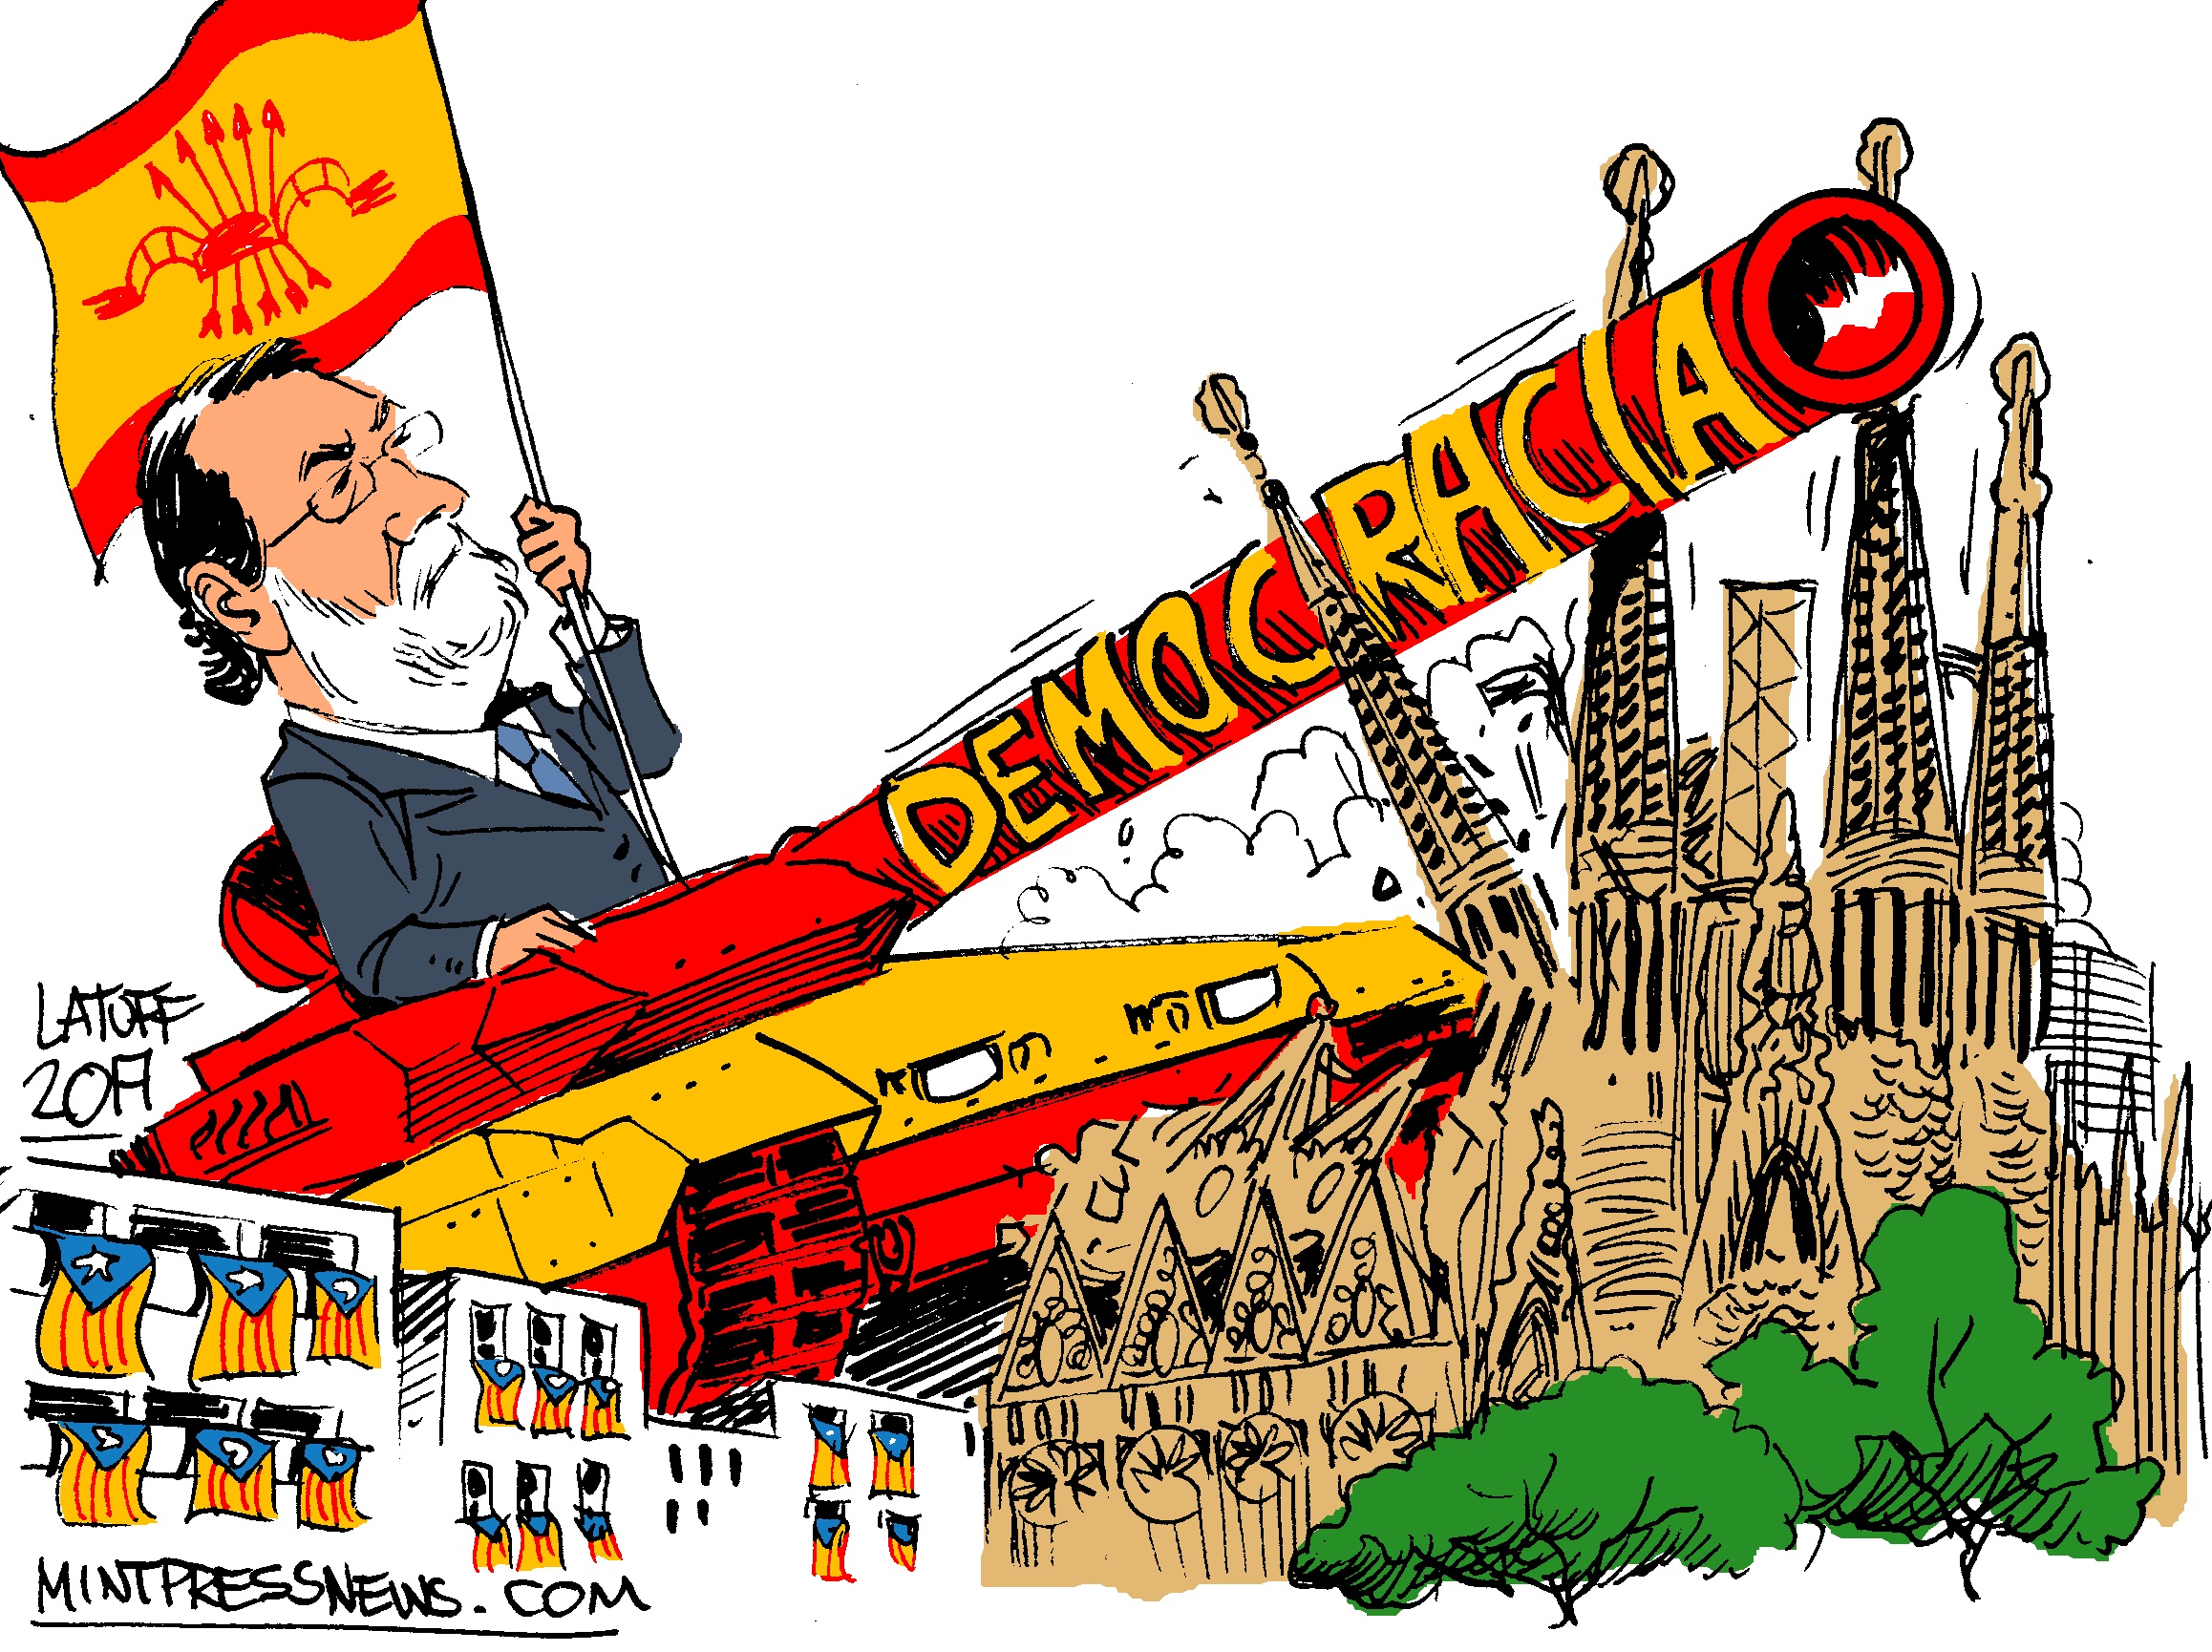 The King Of Spain Rajoy Invades Catalonia On The Back Of A Tank A MintPress News Exclusive Editorial Cartoon By Artist Carlos Latuff